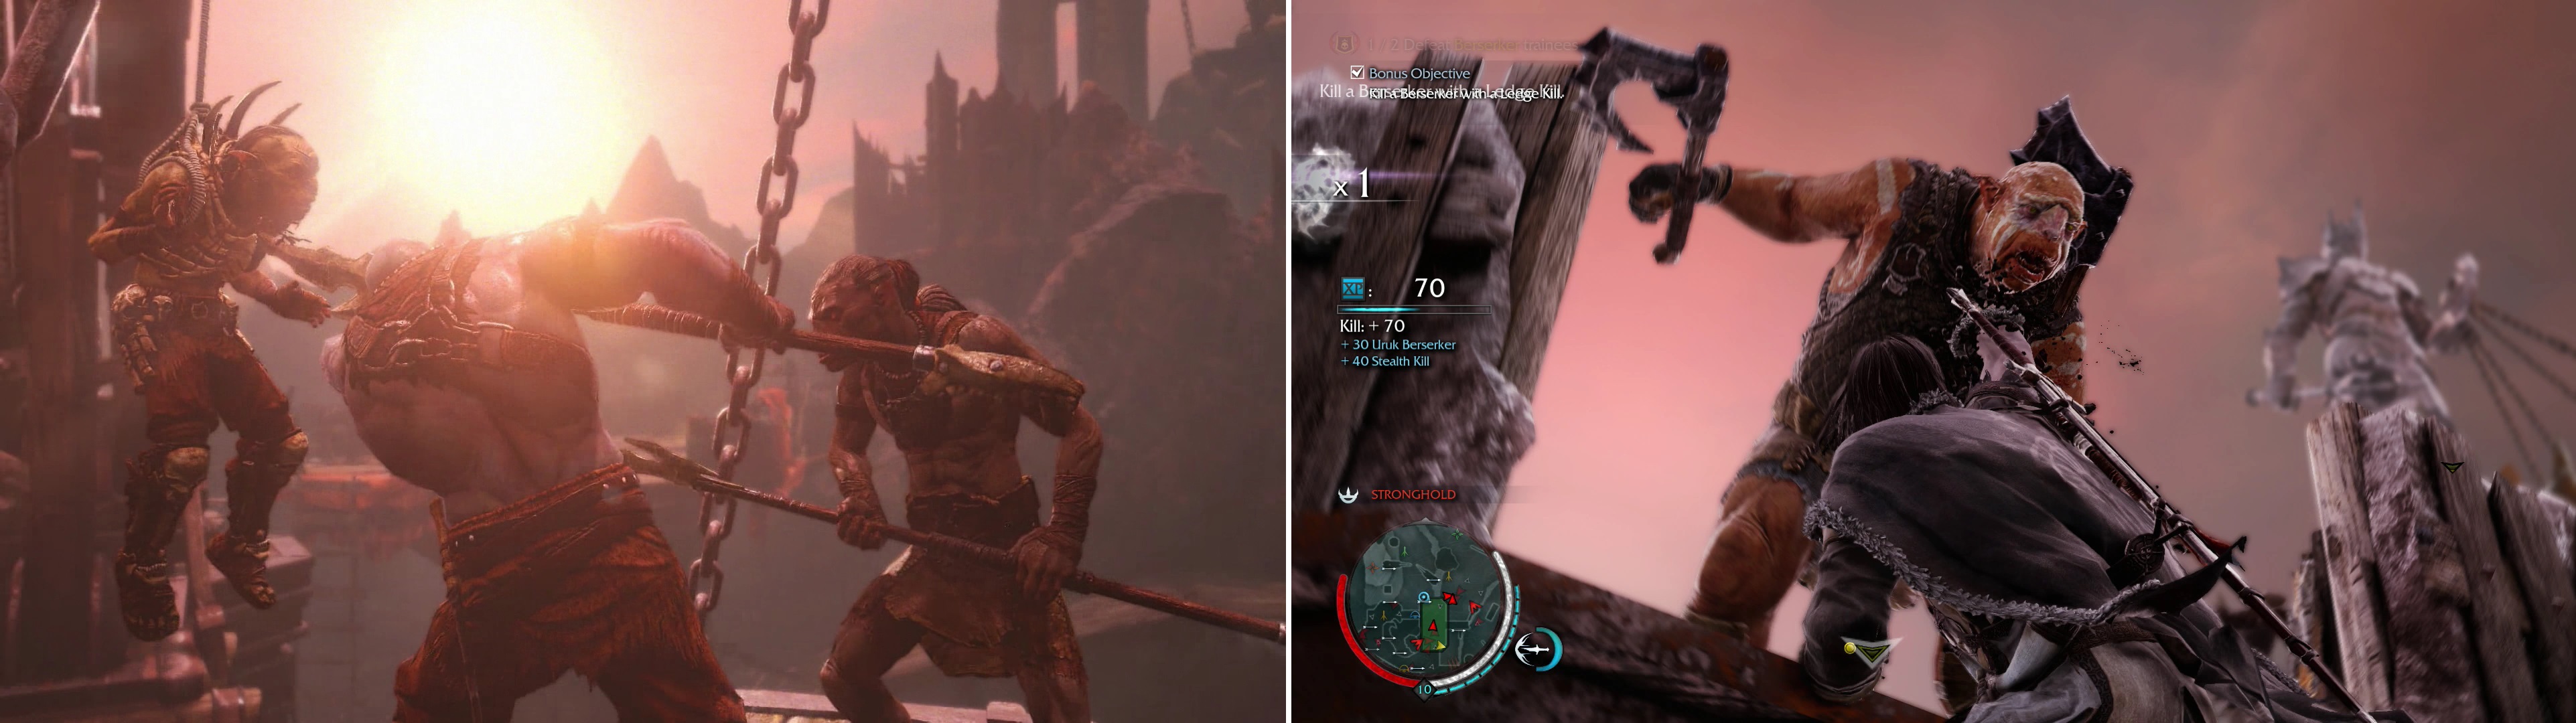 In our absence, Ratbag has again landed himself in trouble (left). The bonus objective for this mission can be satisfied by performing a Ledge Kill on one of the Berserker Trainees (right).